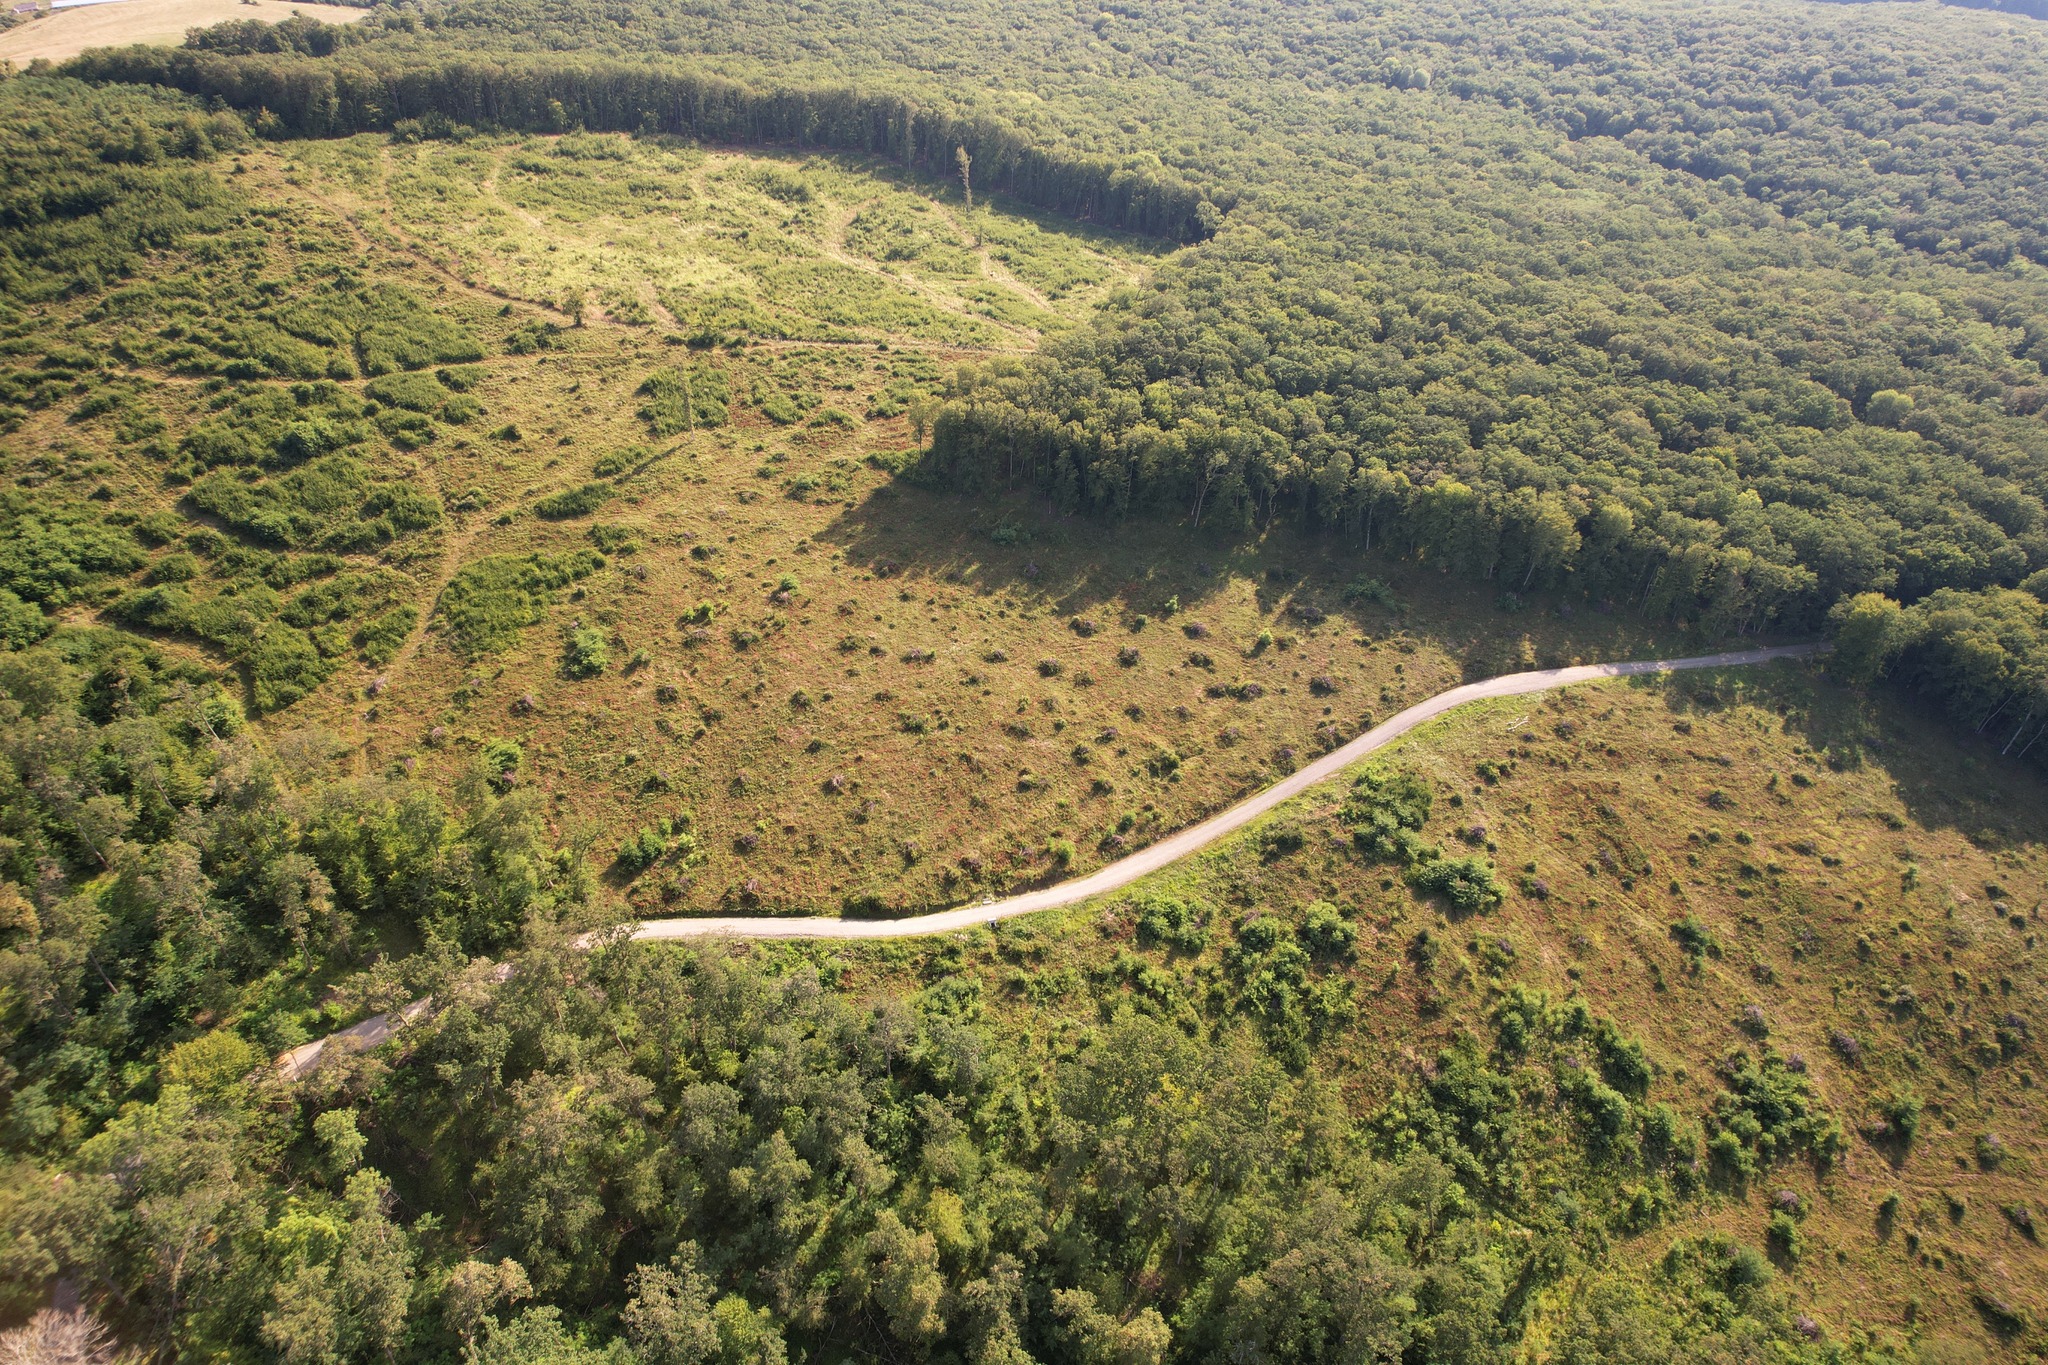 Environmental NGOs urge IKEA to better oversee its forestry operations in Romania in new report